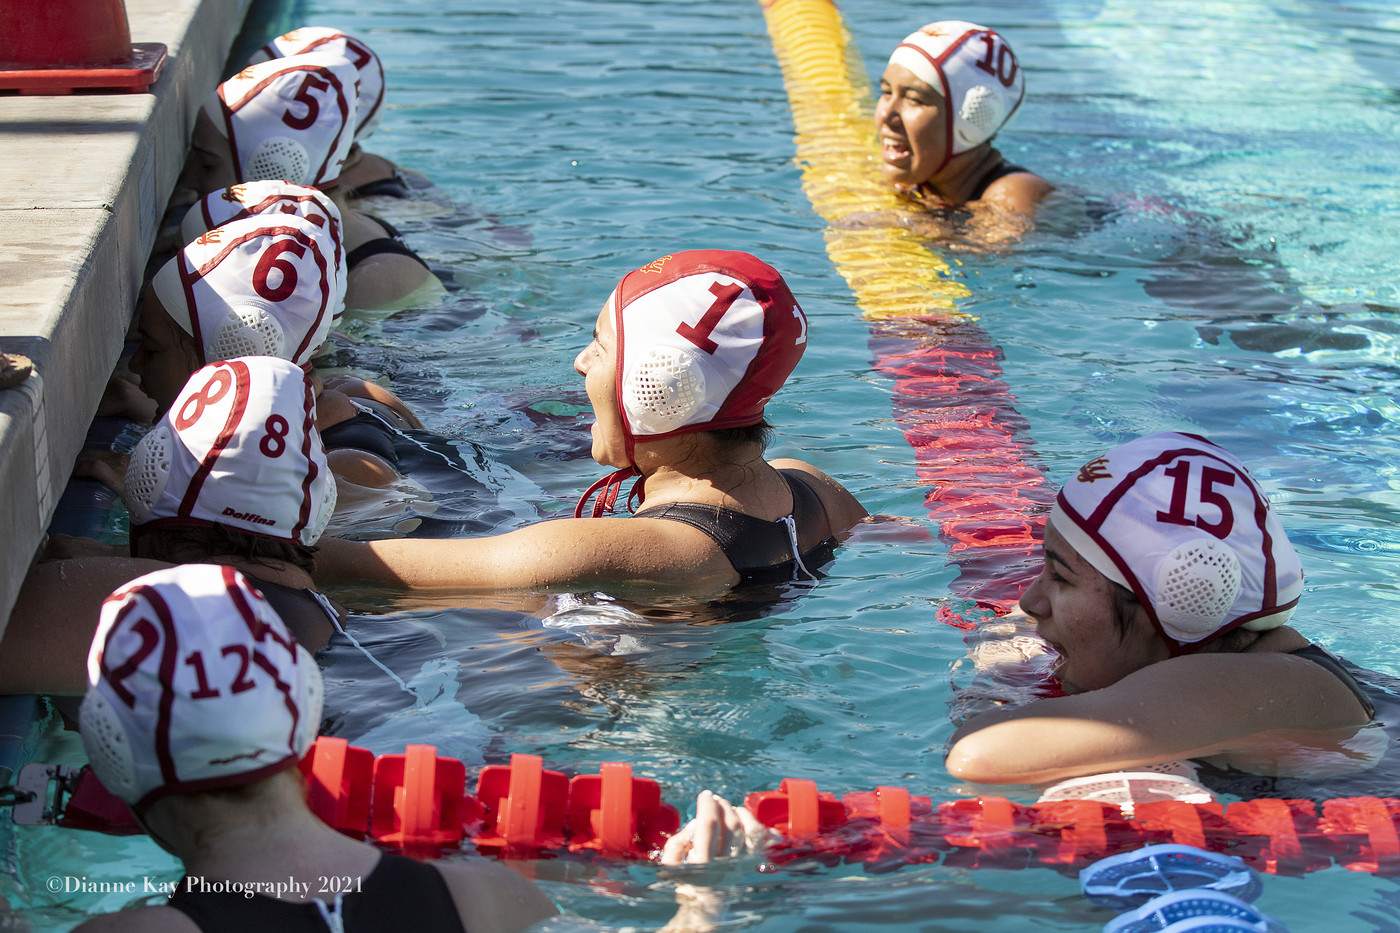 City comes up short at SJ Delta 12-8, but the Panthers are happy to be back in the water as 2021 gets underway